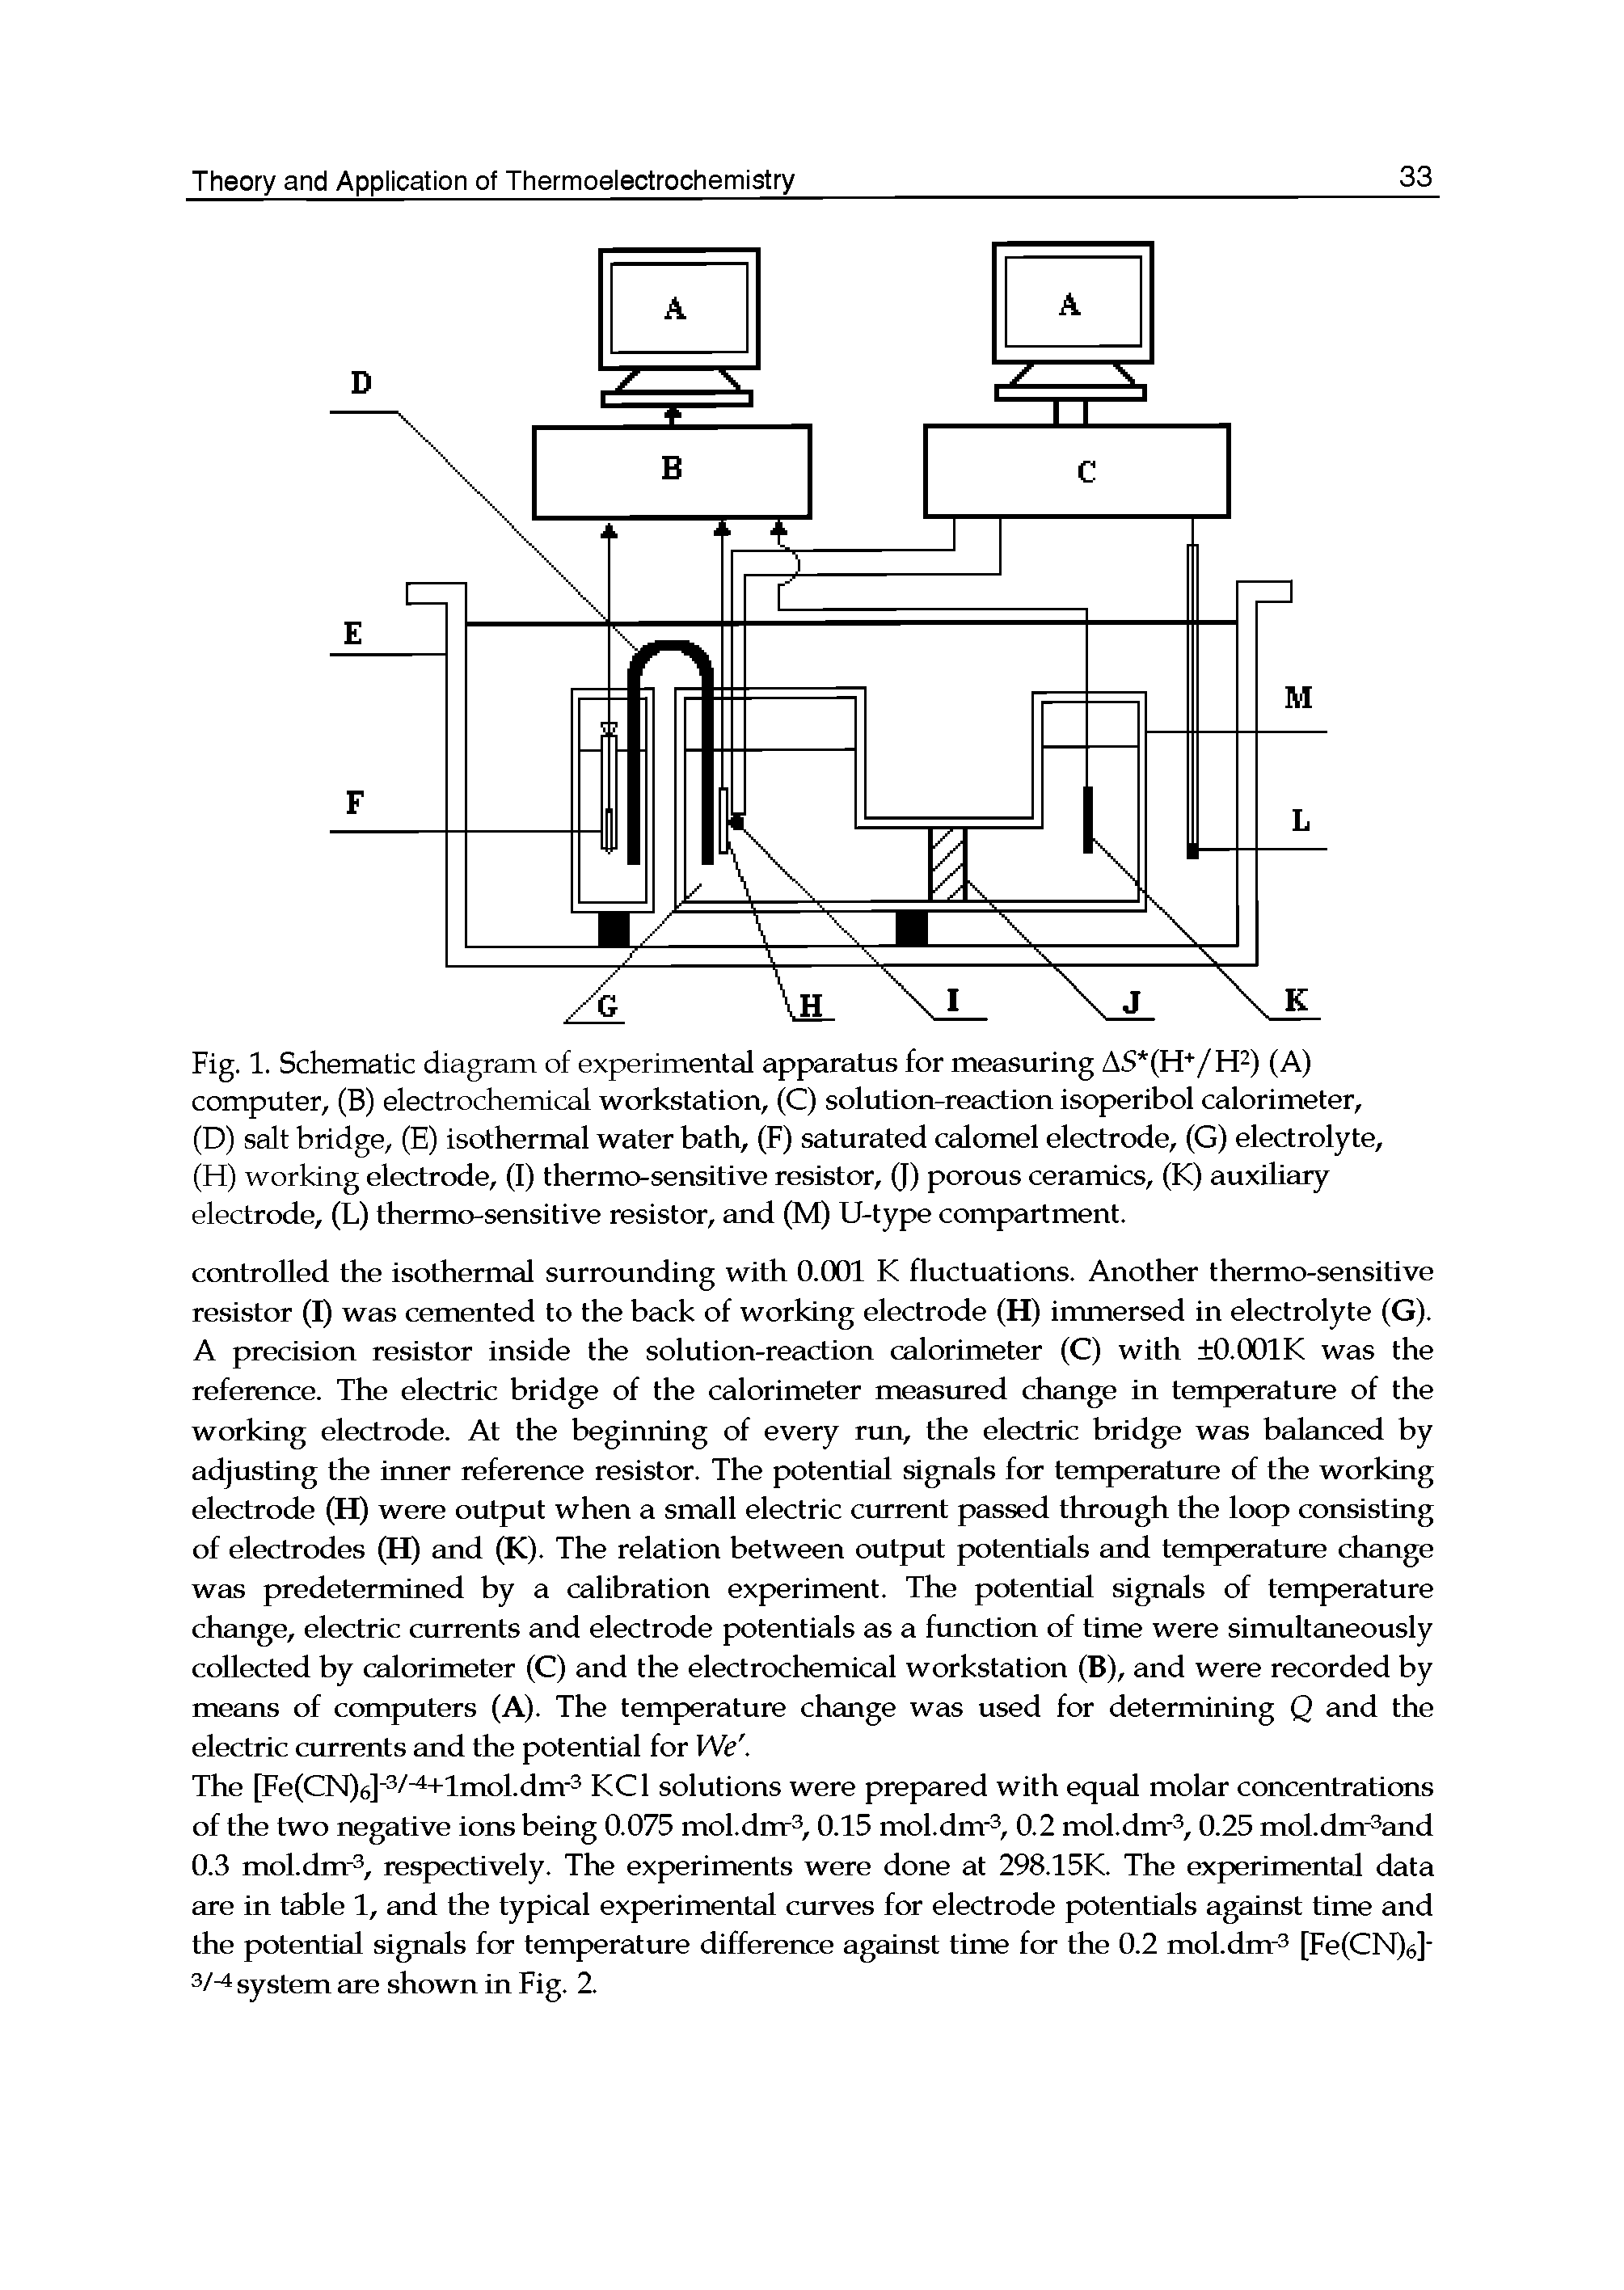 Fig. 1. Schematic diagram of experimental apparatus for measuring AS (H /H2) (A) computer, (B) electrochemical workstation, (C) solution-reaction isoperibol calorimeter,...